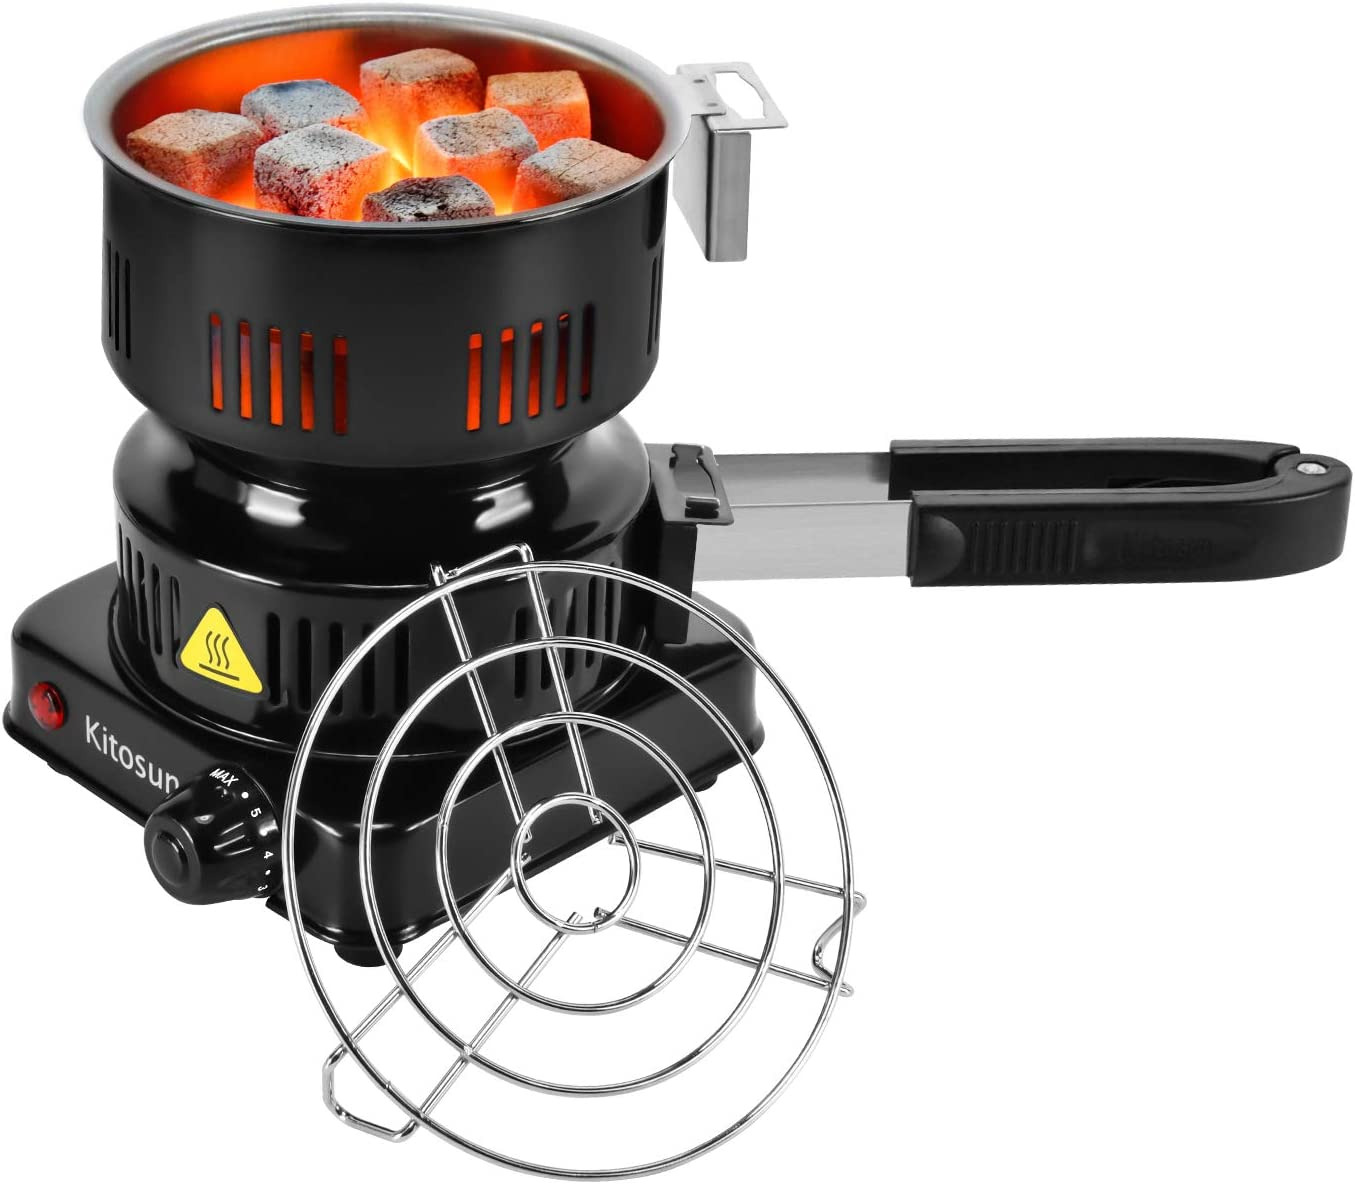 Electric Stove Coconut Charcoal Starter - ETL Approved Hot Plate Durable Faster 